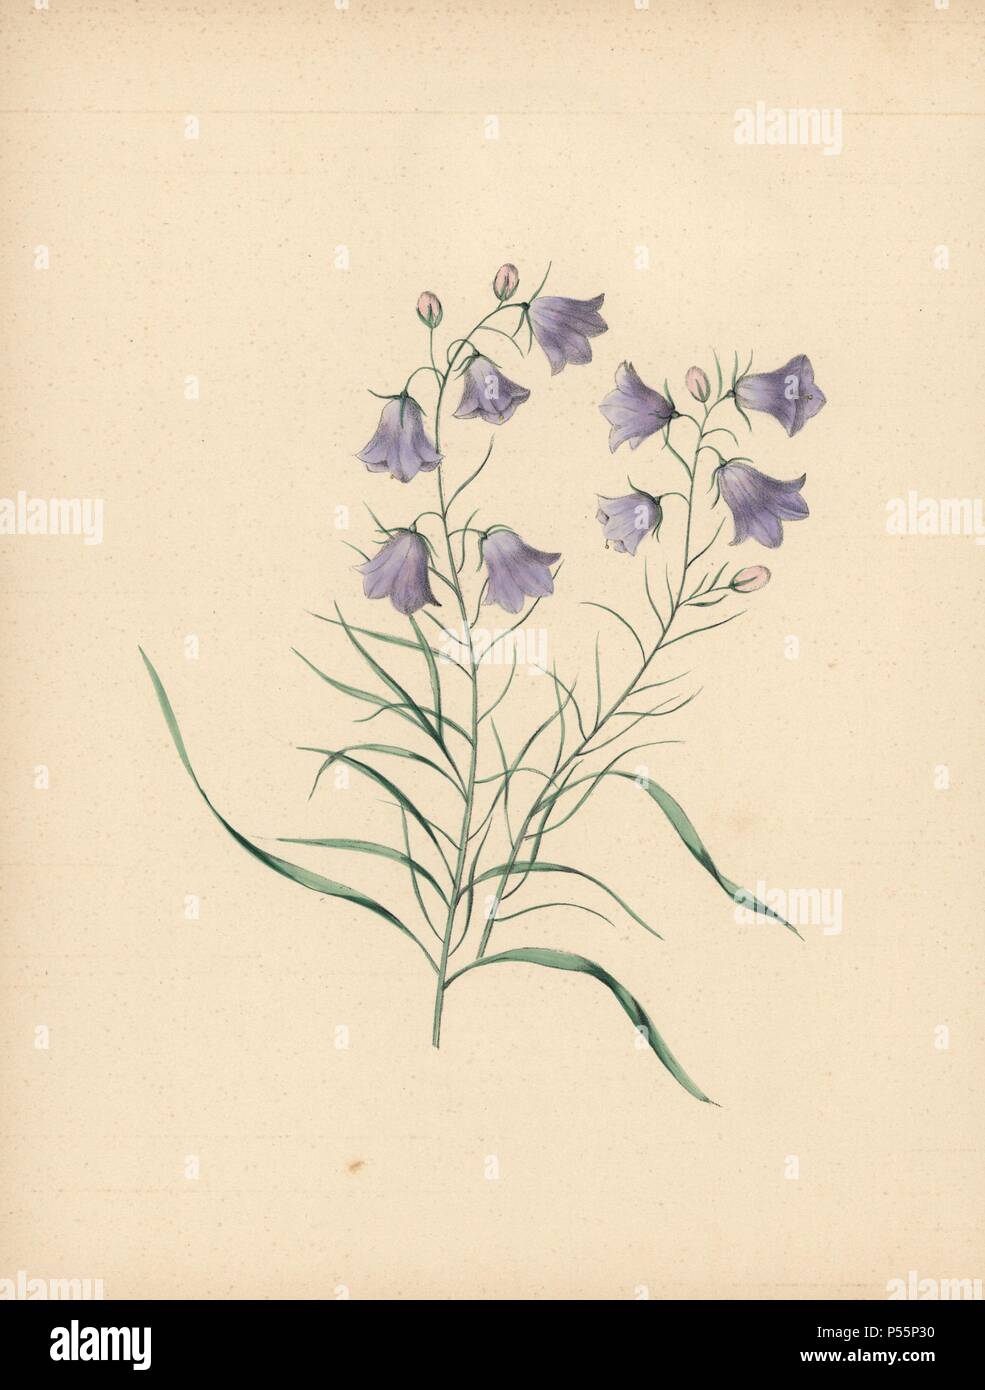 Harebell. Campanula rotundifolia. Illustration by Clarissa Badger, nee Munger, from 'Wild Flowers, Drawn and Colored from Nature,' New York, 1859. . Clarissa Munger (1806-1889) was born into an artistic family in East Guilford, Connecticut. Her father George was an engraver and miniaturist, and her sister Caroline painted portraits. Clarissa married the Rev. Milton Badger in 1828, and in 1848 published 'Forget Me Not' with original watercolors, believed to be the prototype 'Wild Flowers' (1859) with 22 lithographs and 'Floral Belles' (1867) with 16 plates. Stock Photo